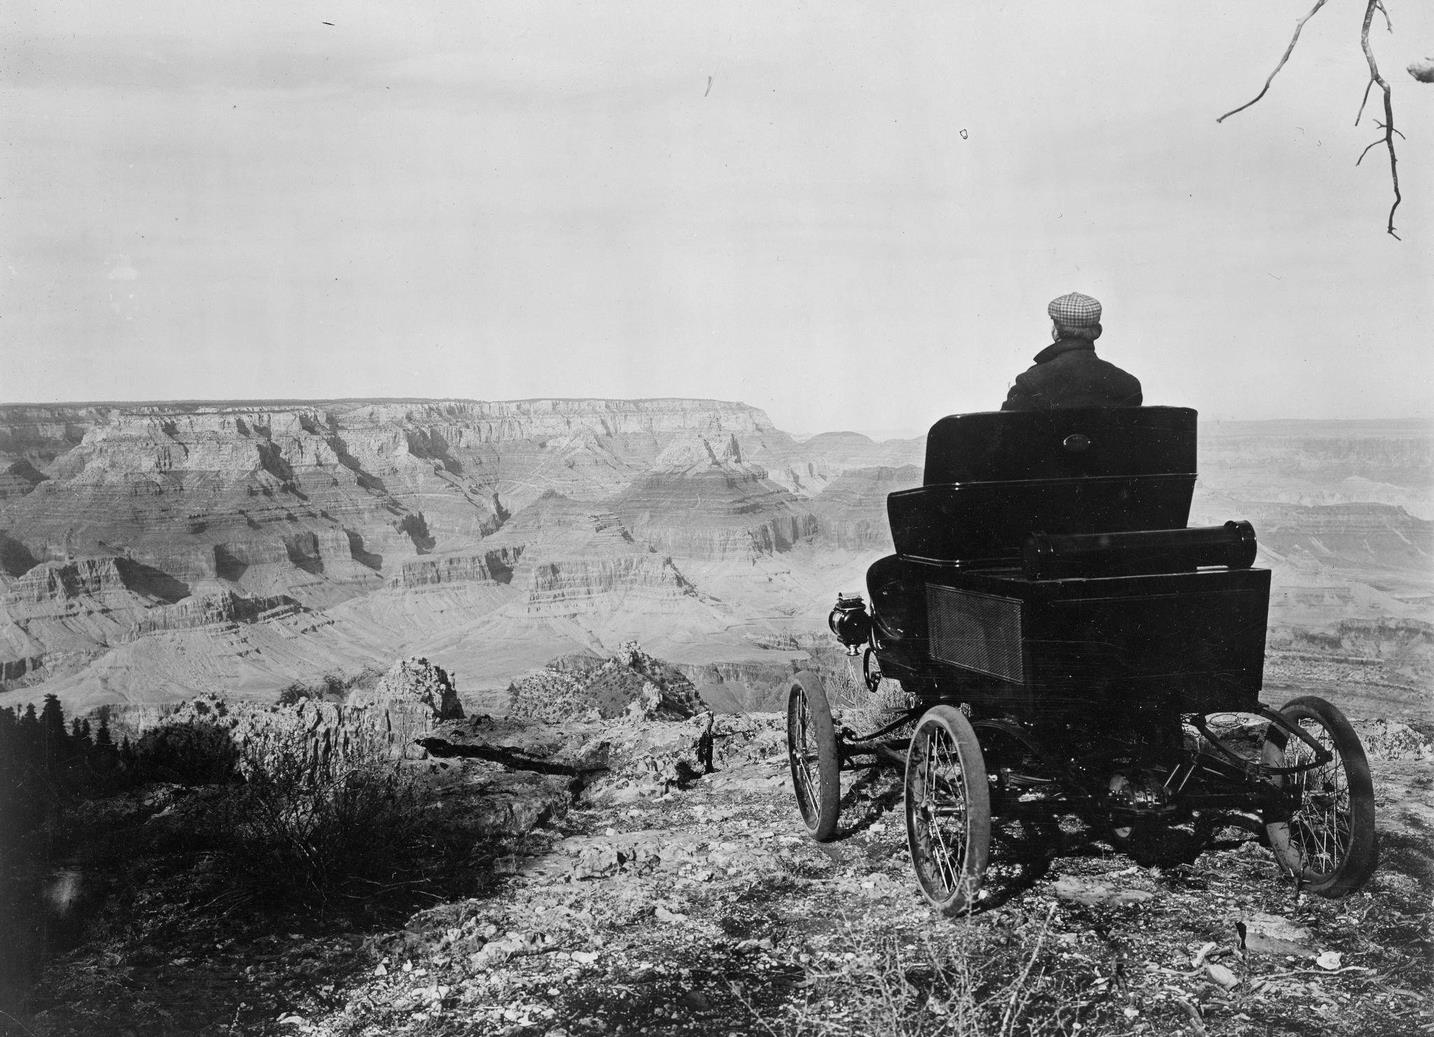 A man sits in a Toledo Steam Carriage on the rim of the Grand Canyon, 1902